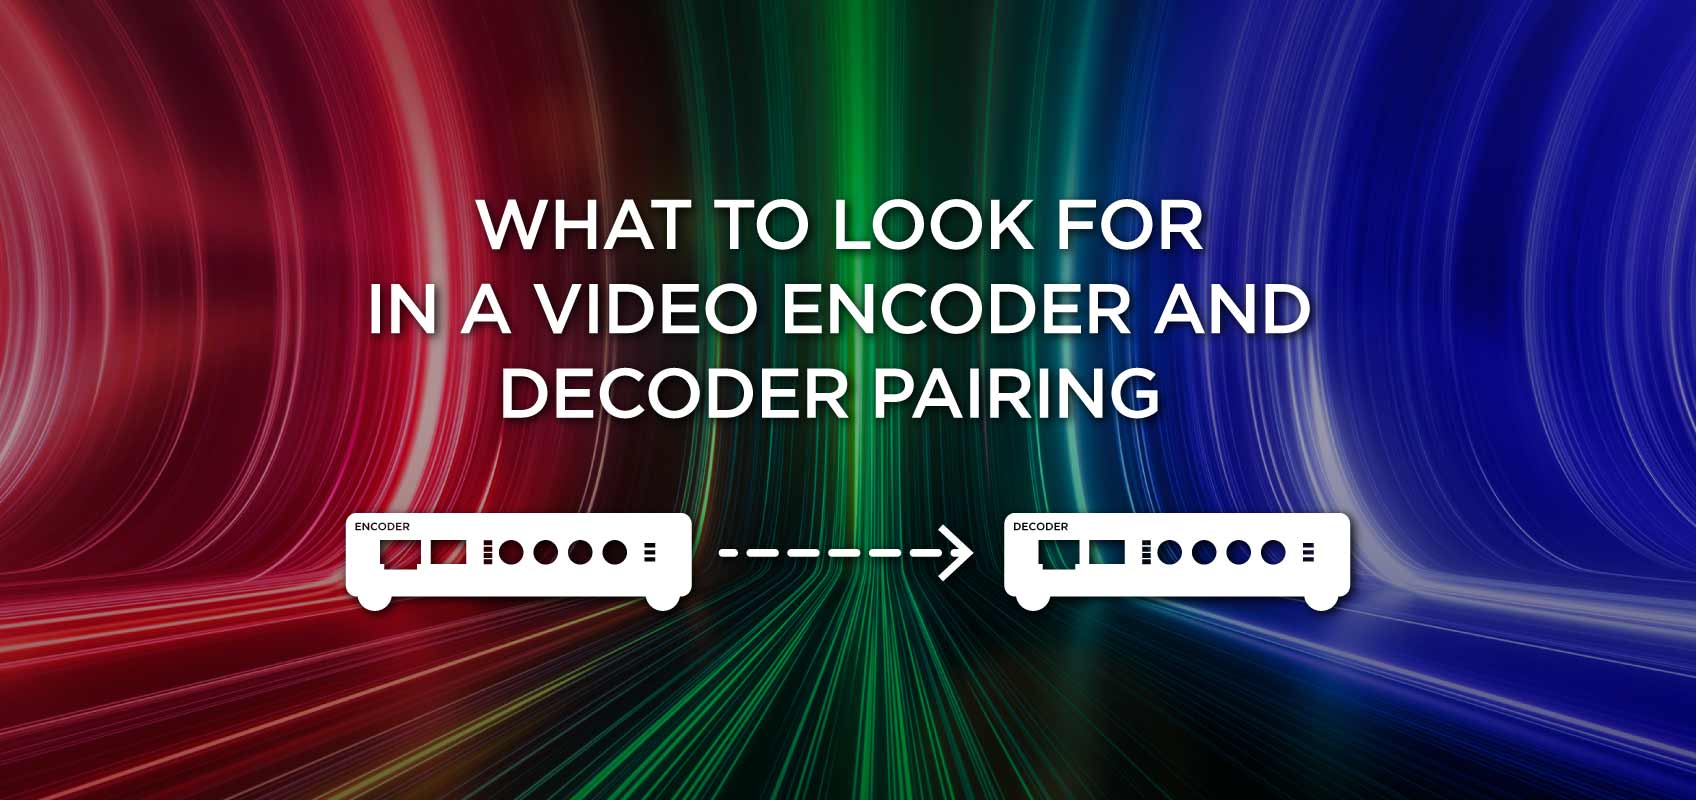 What to look for in a video encoder and decoder pairing